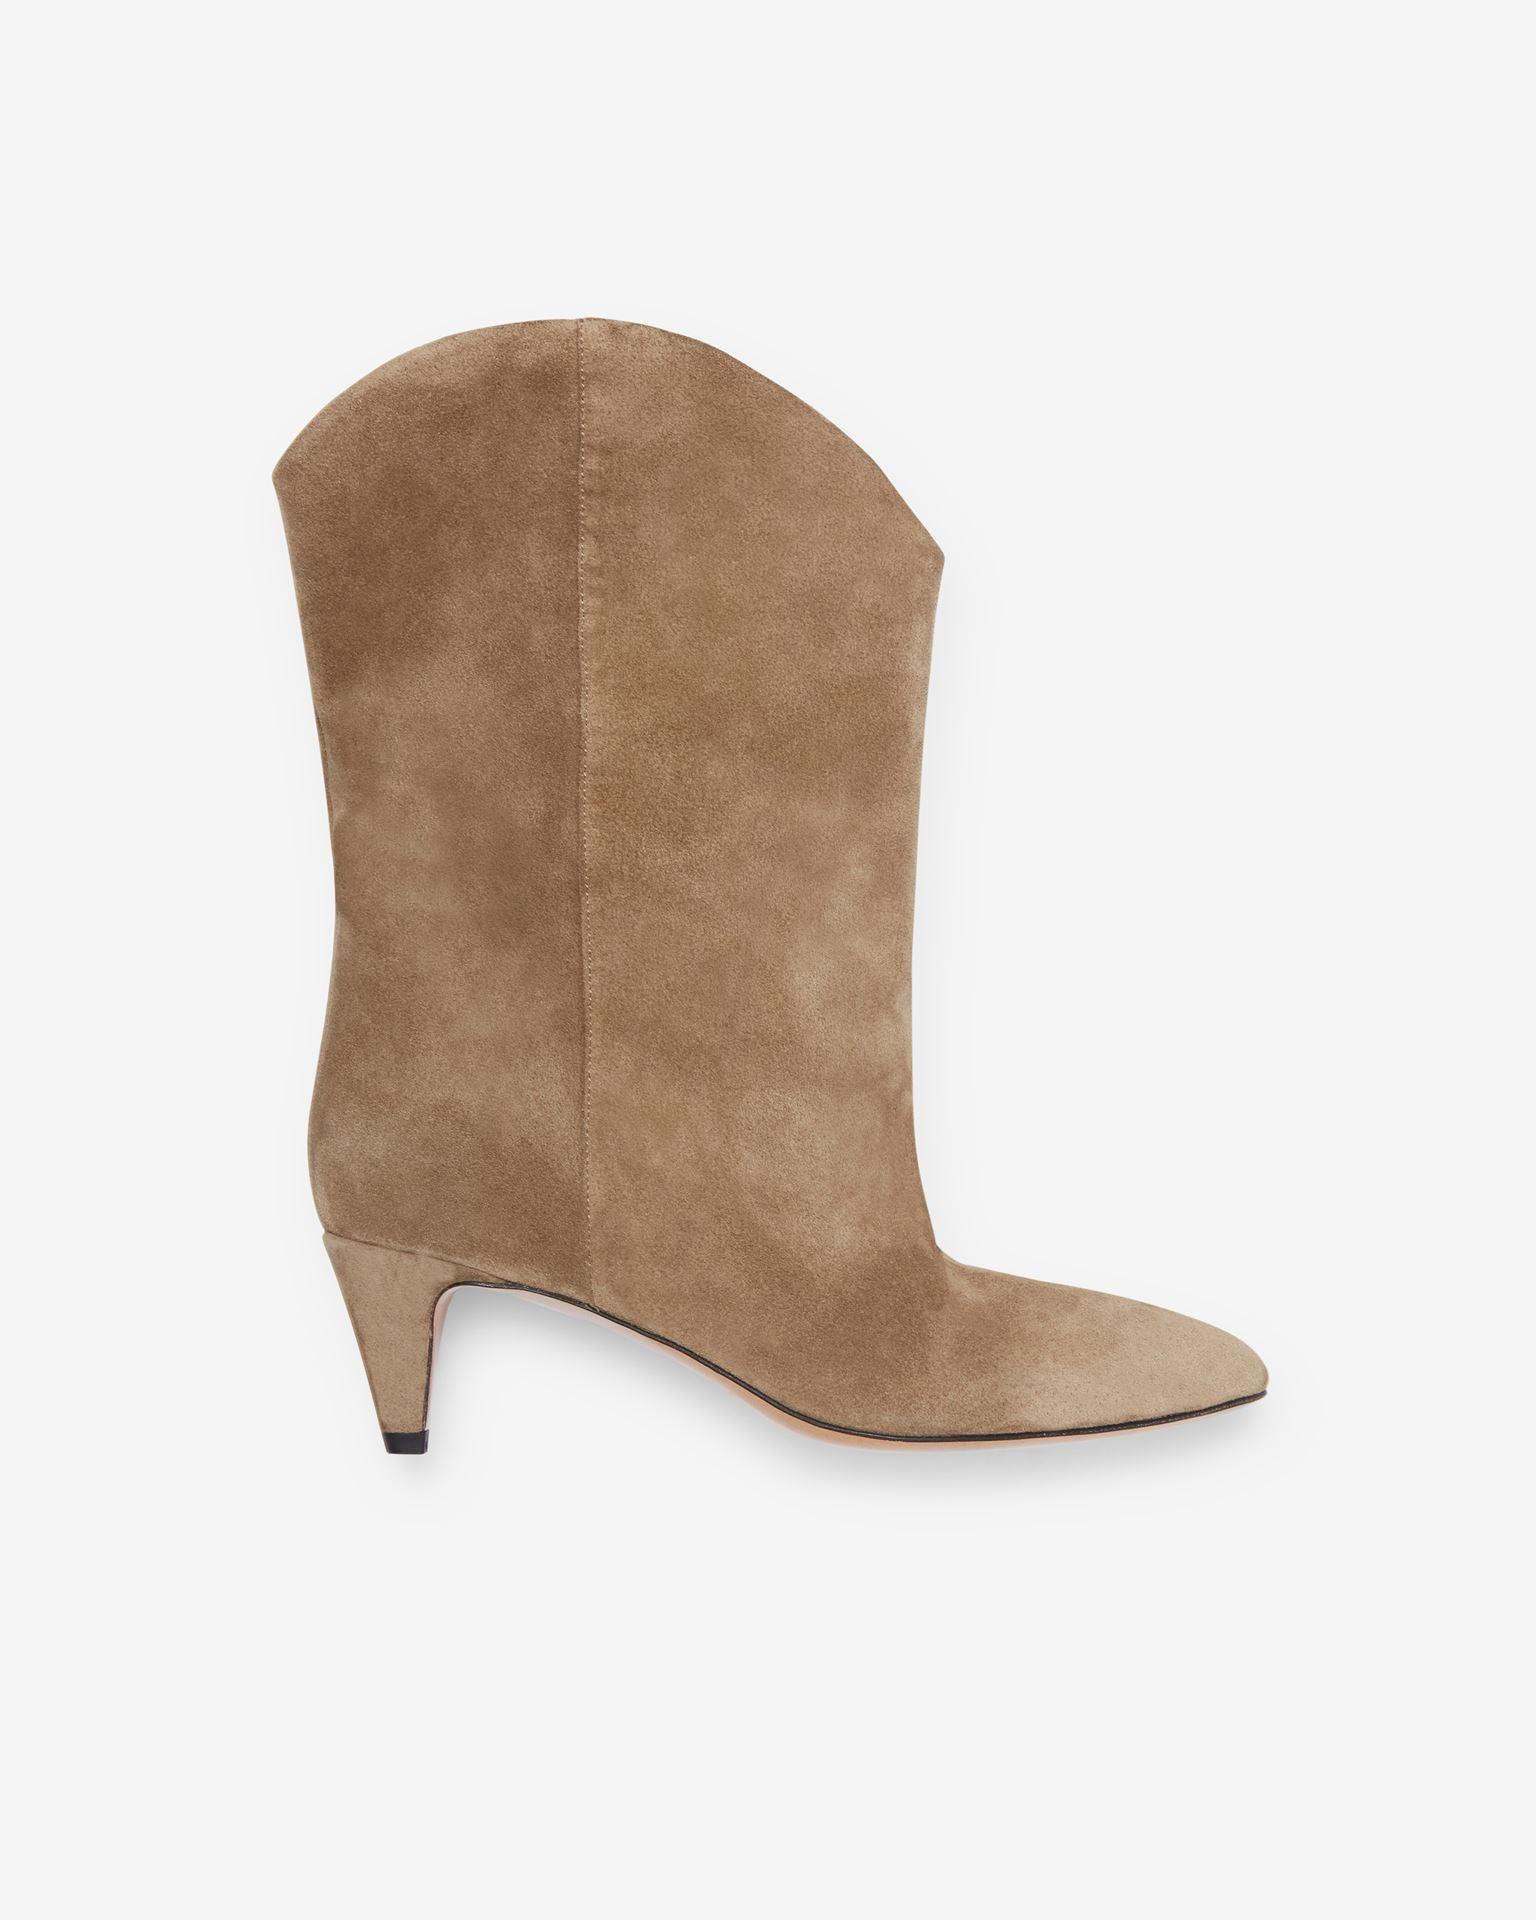 Isabel Marant Dernee Suede Ankle Boots in White | Lyst